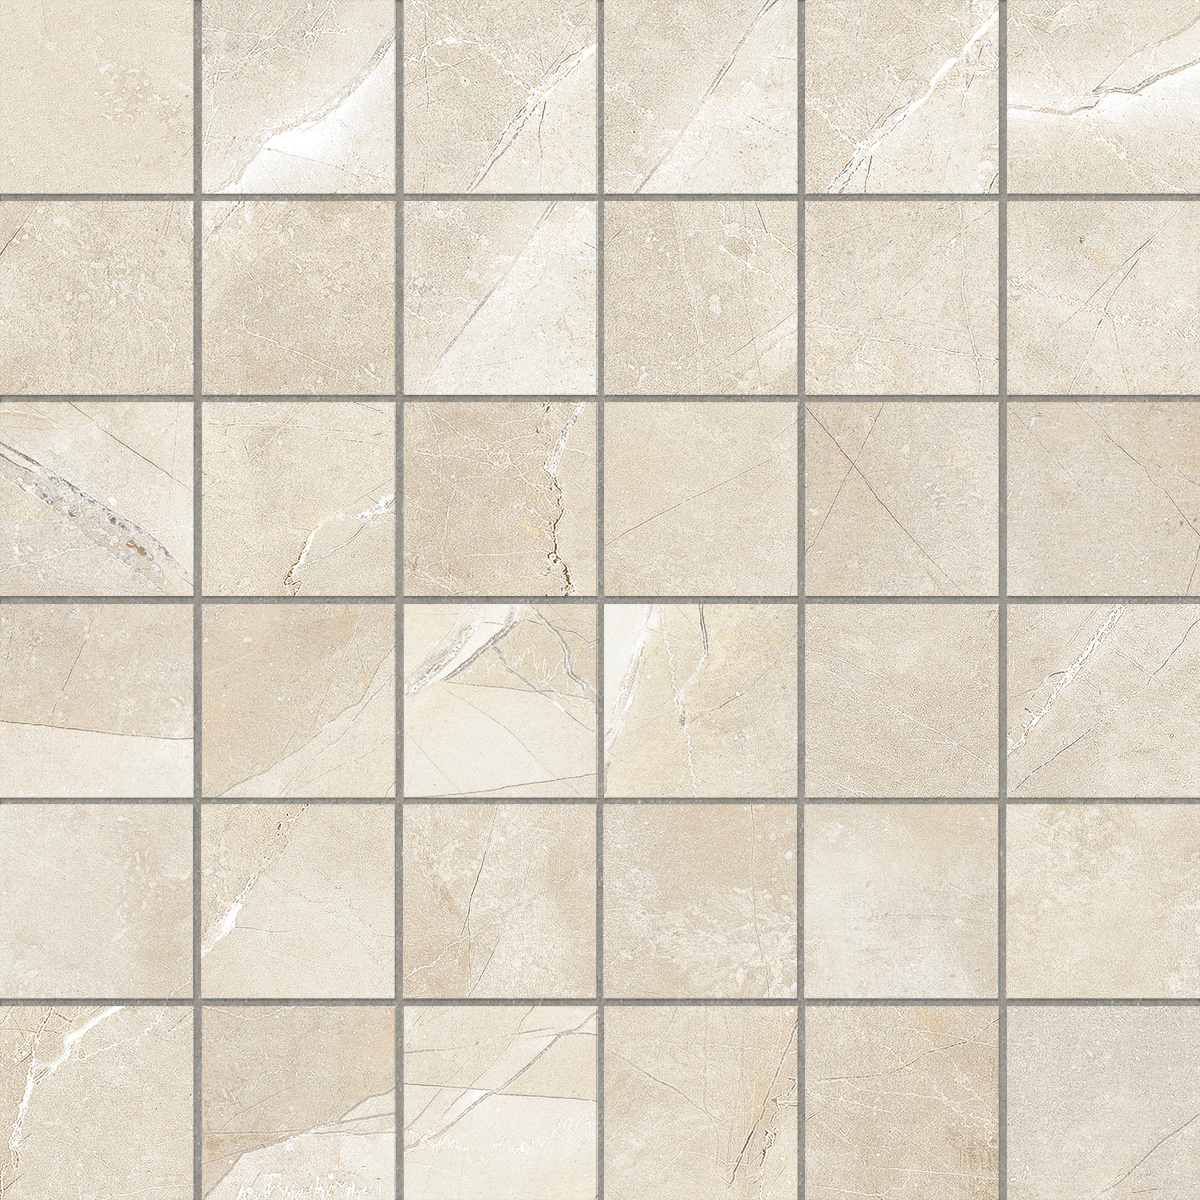 pulpis ivory straight stack 2x2-inch pattern glazed porcelain mosaic from classic anatolia collection distributed by surface group international matte finish straight edge edge mesh shape